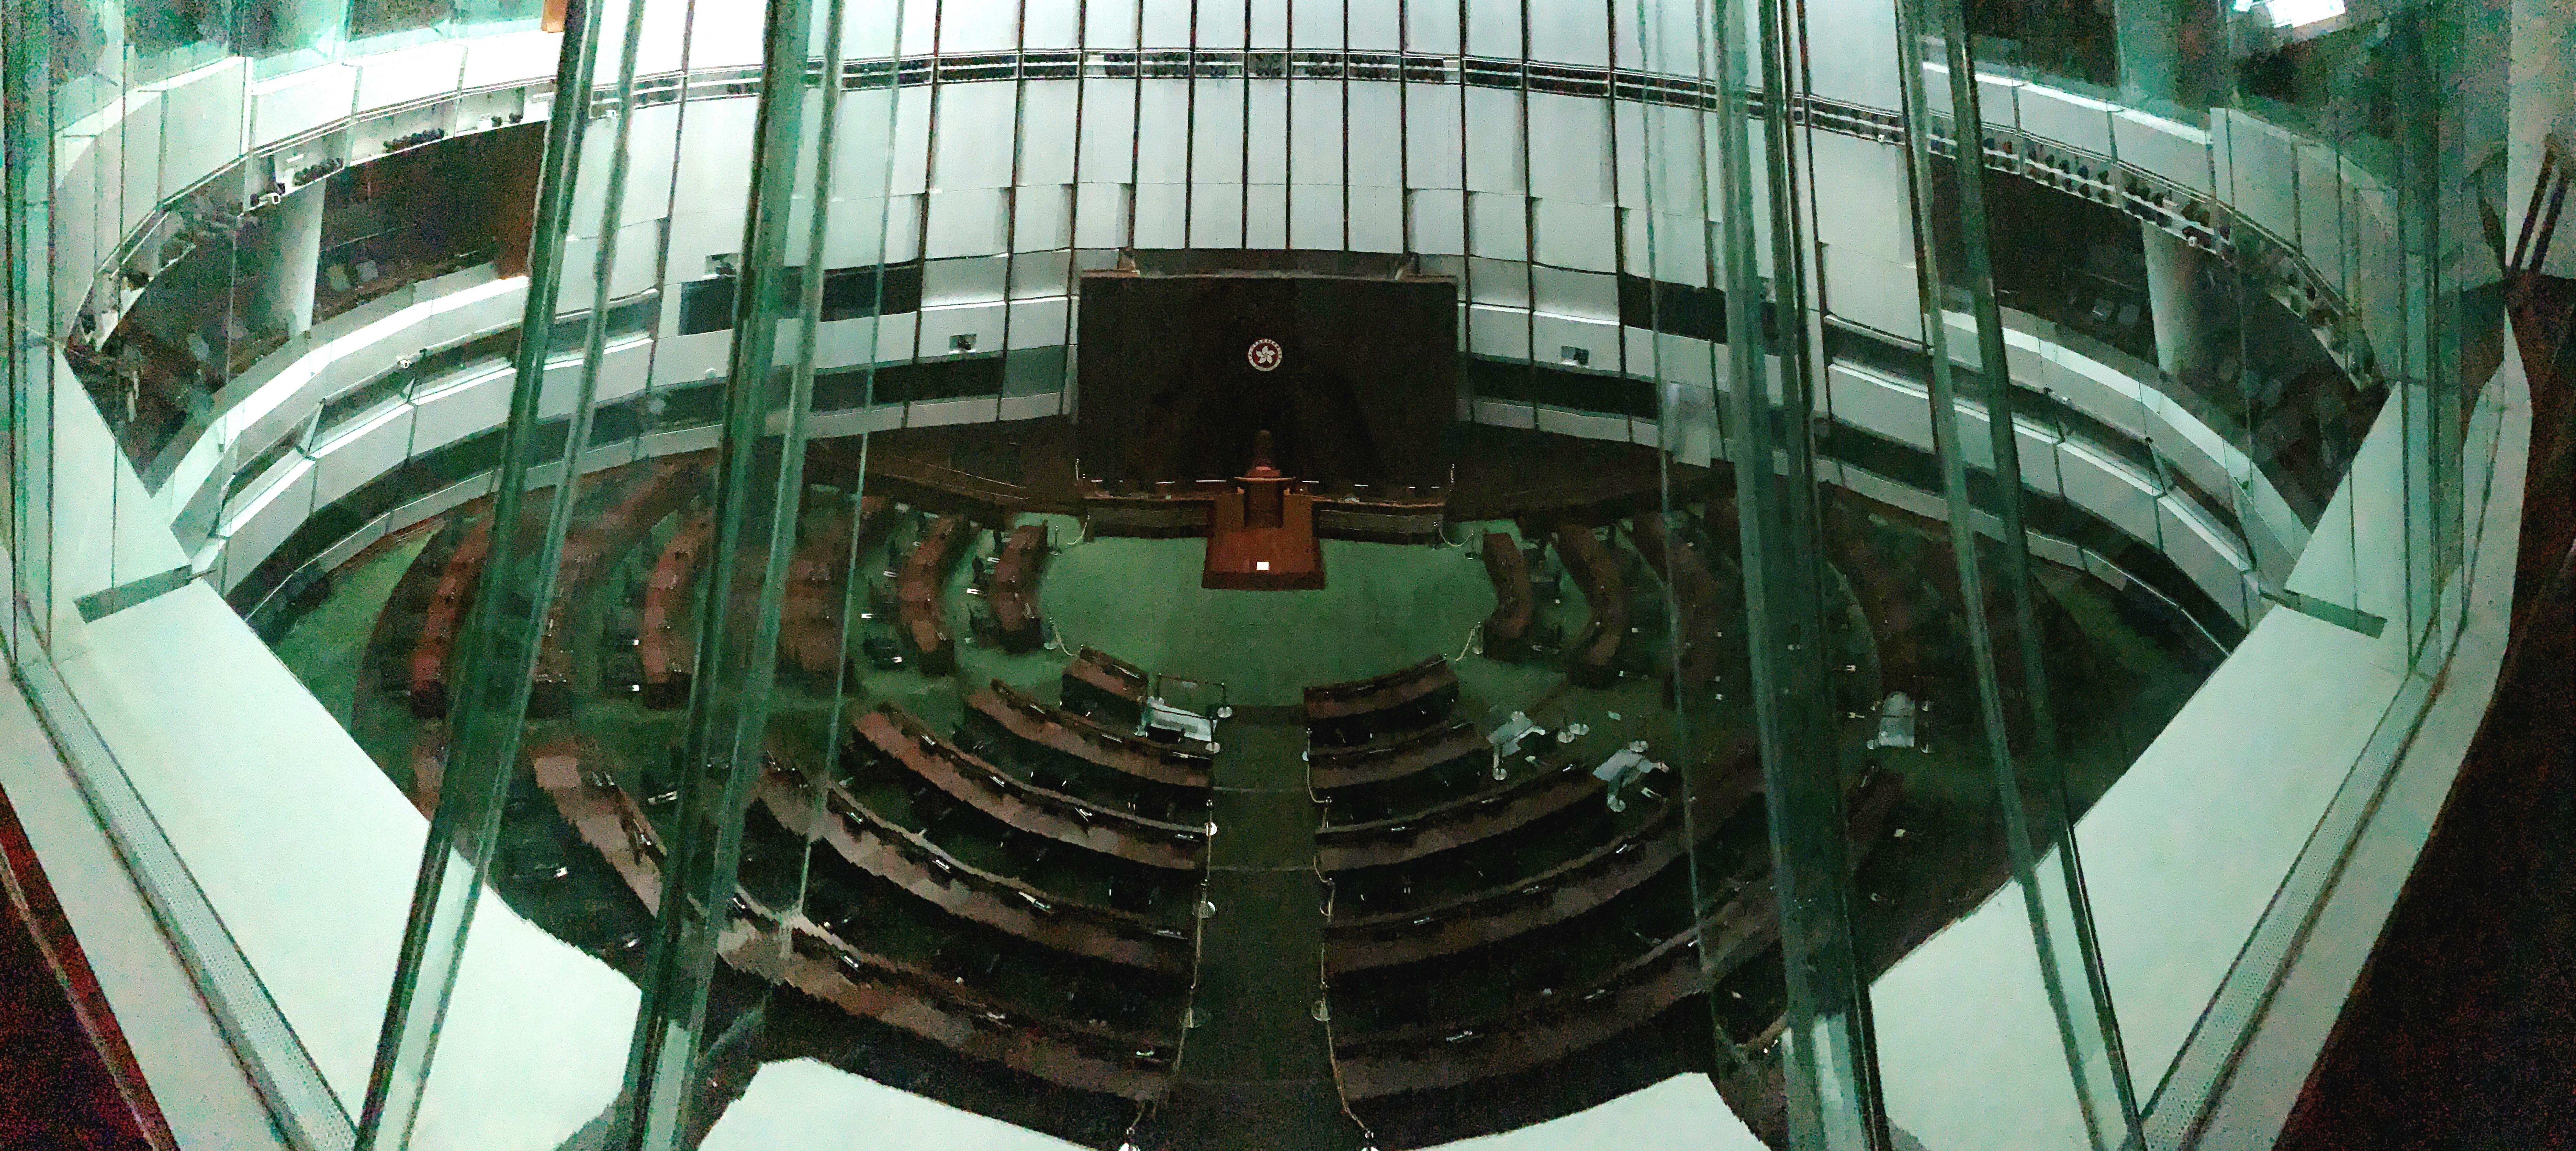 The main chamber in the Legislative Council Complex in Tamar sits empty on July 28. The Hong Kong government has attempted to justify postponing this year’s elections on public health grounds. Photo: Nora Tam